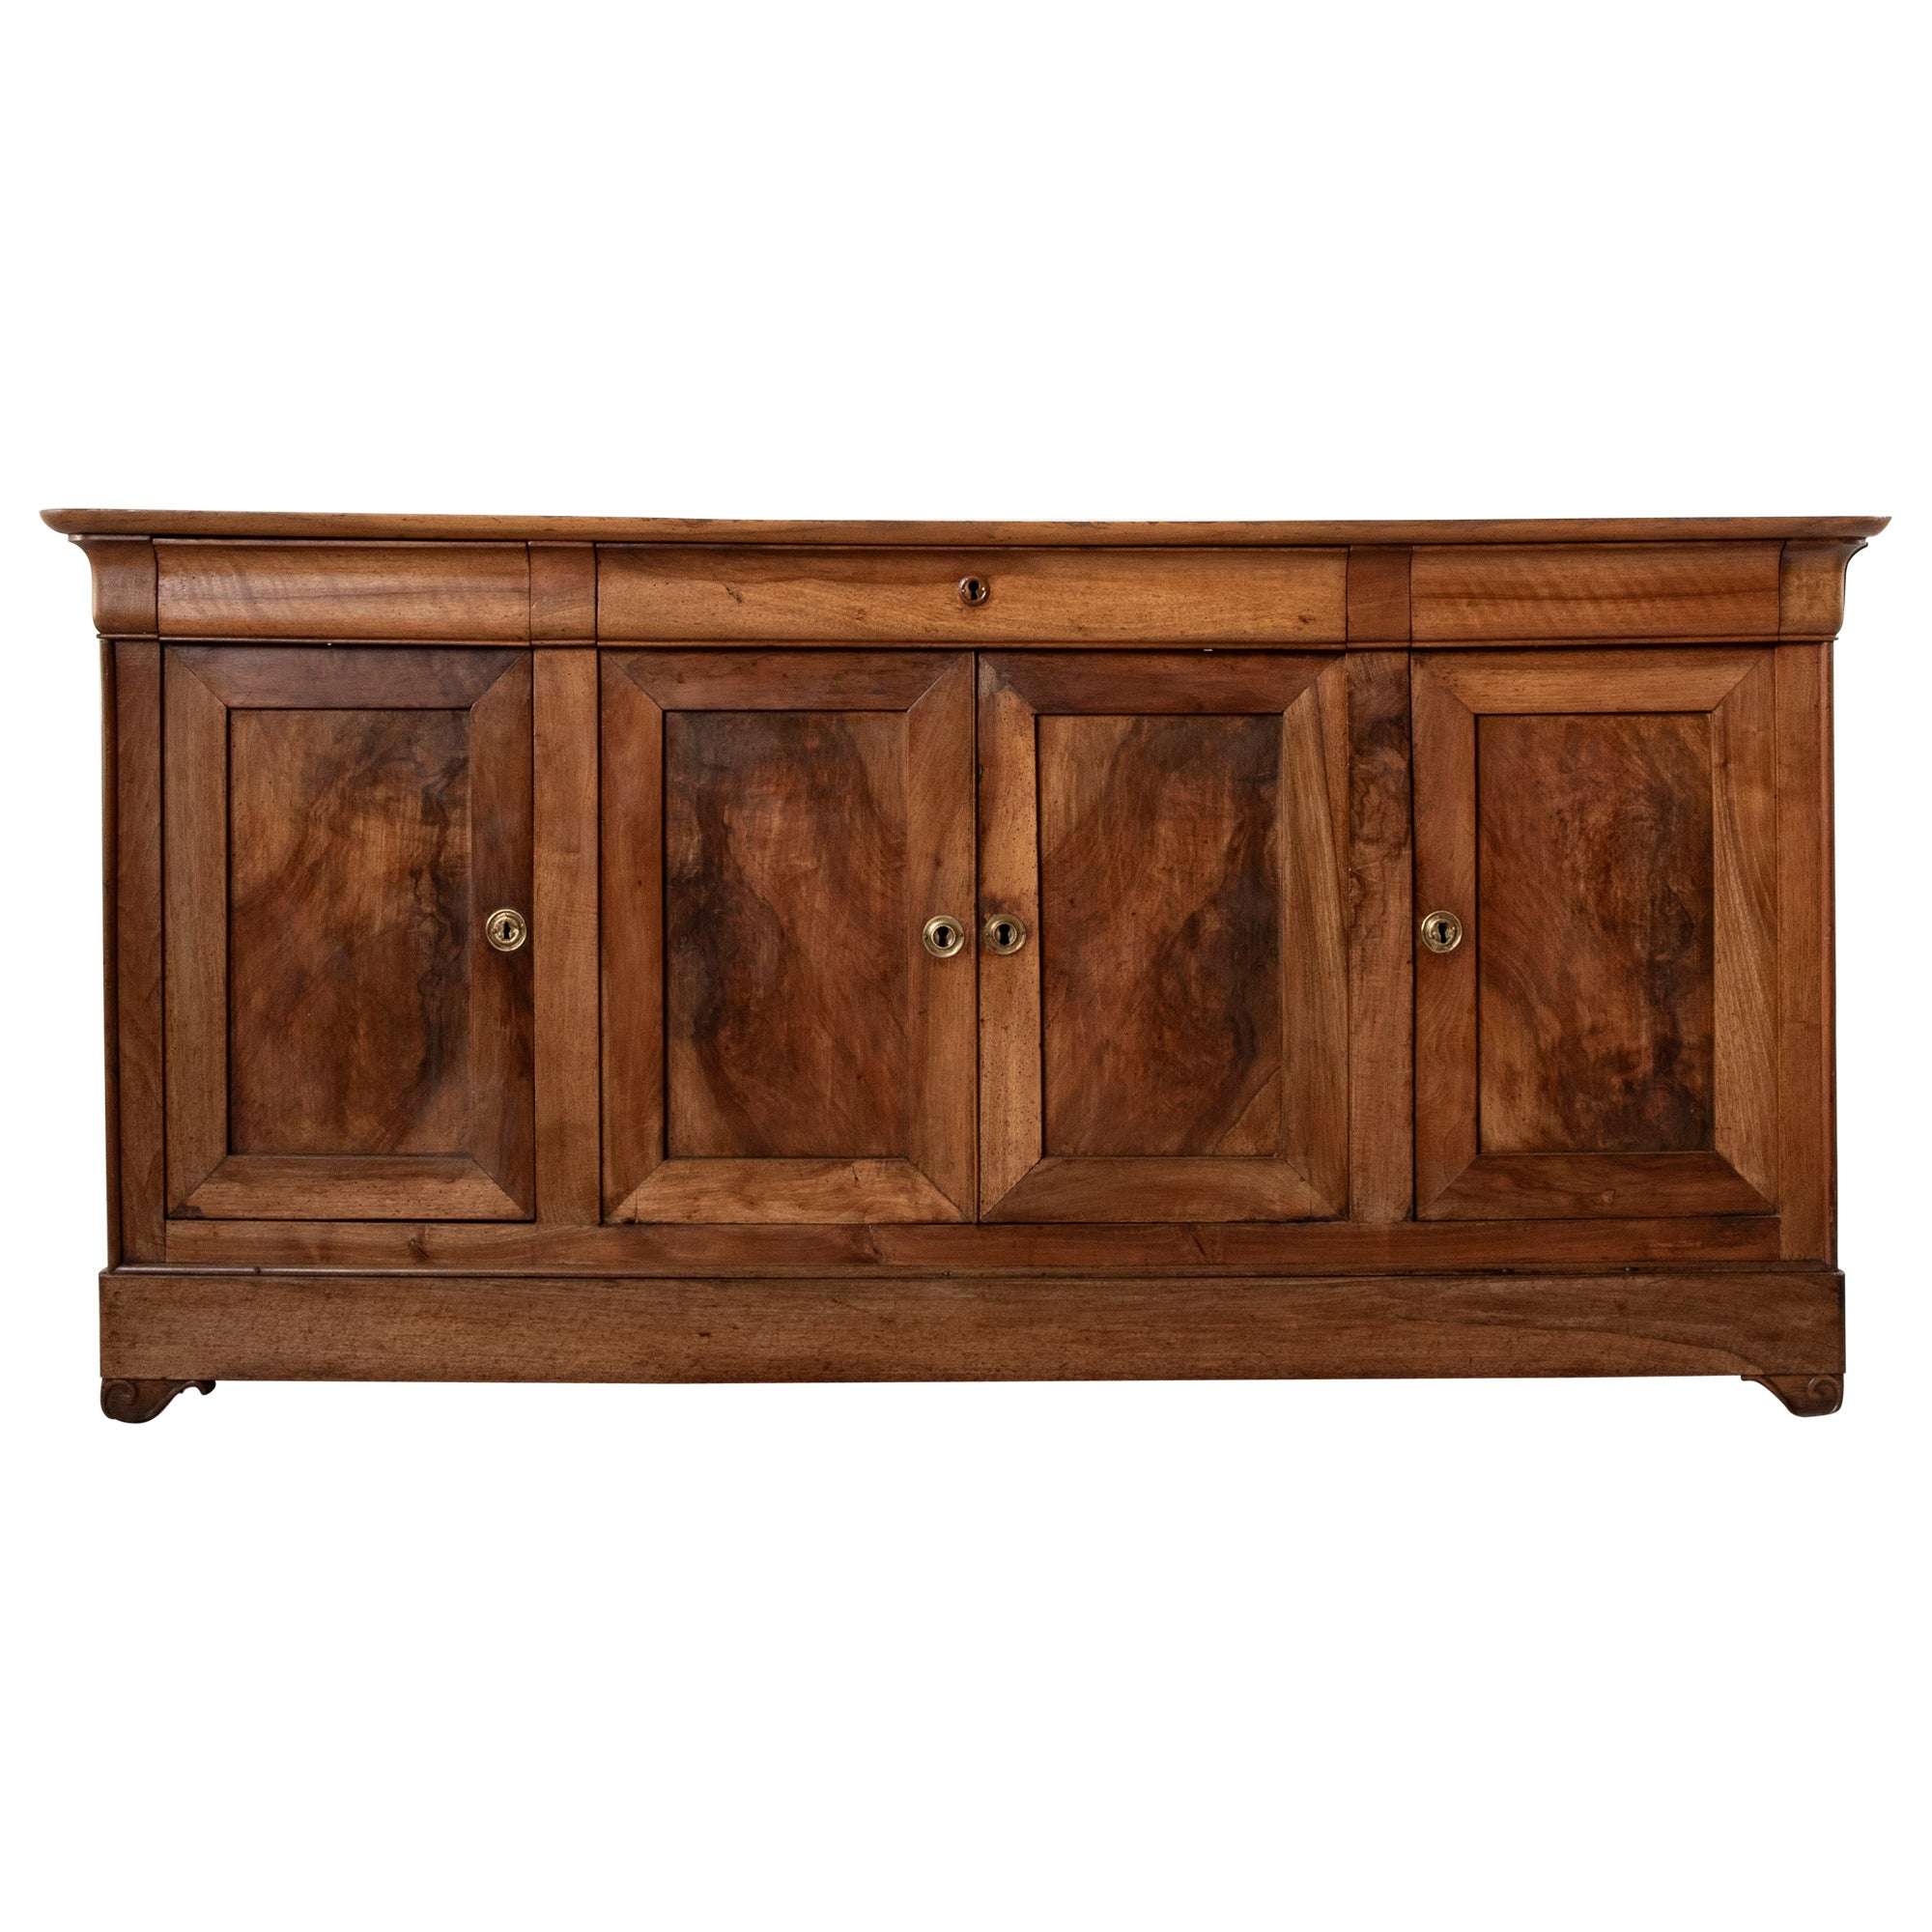 French Louis Philippe Period Walnut Enfilade, Sideboard, Buffet with Four Doors